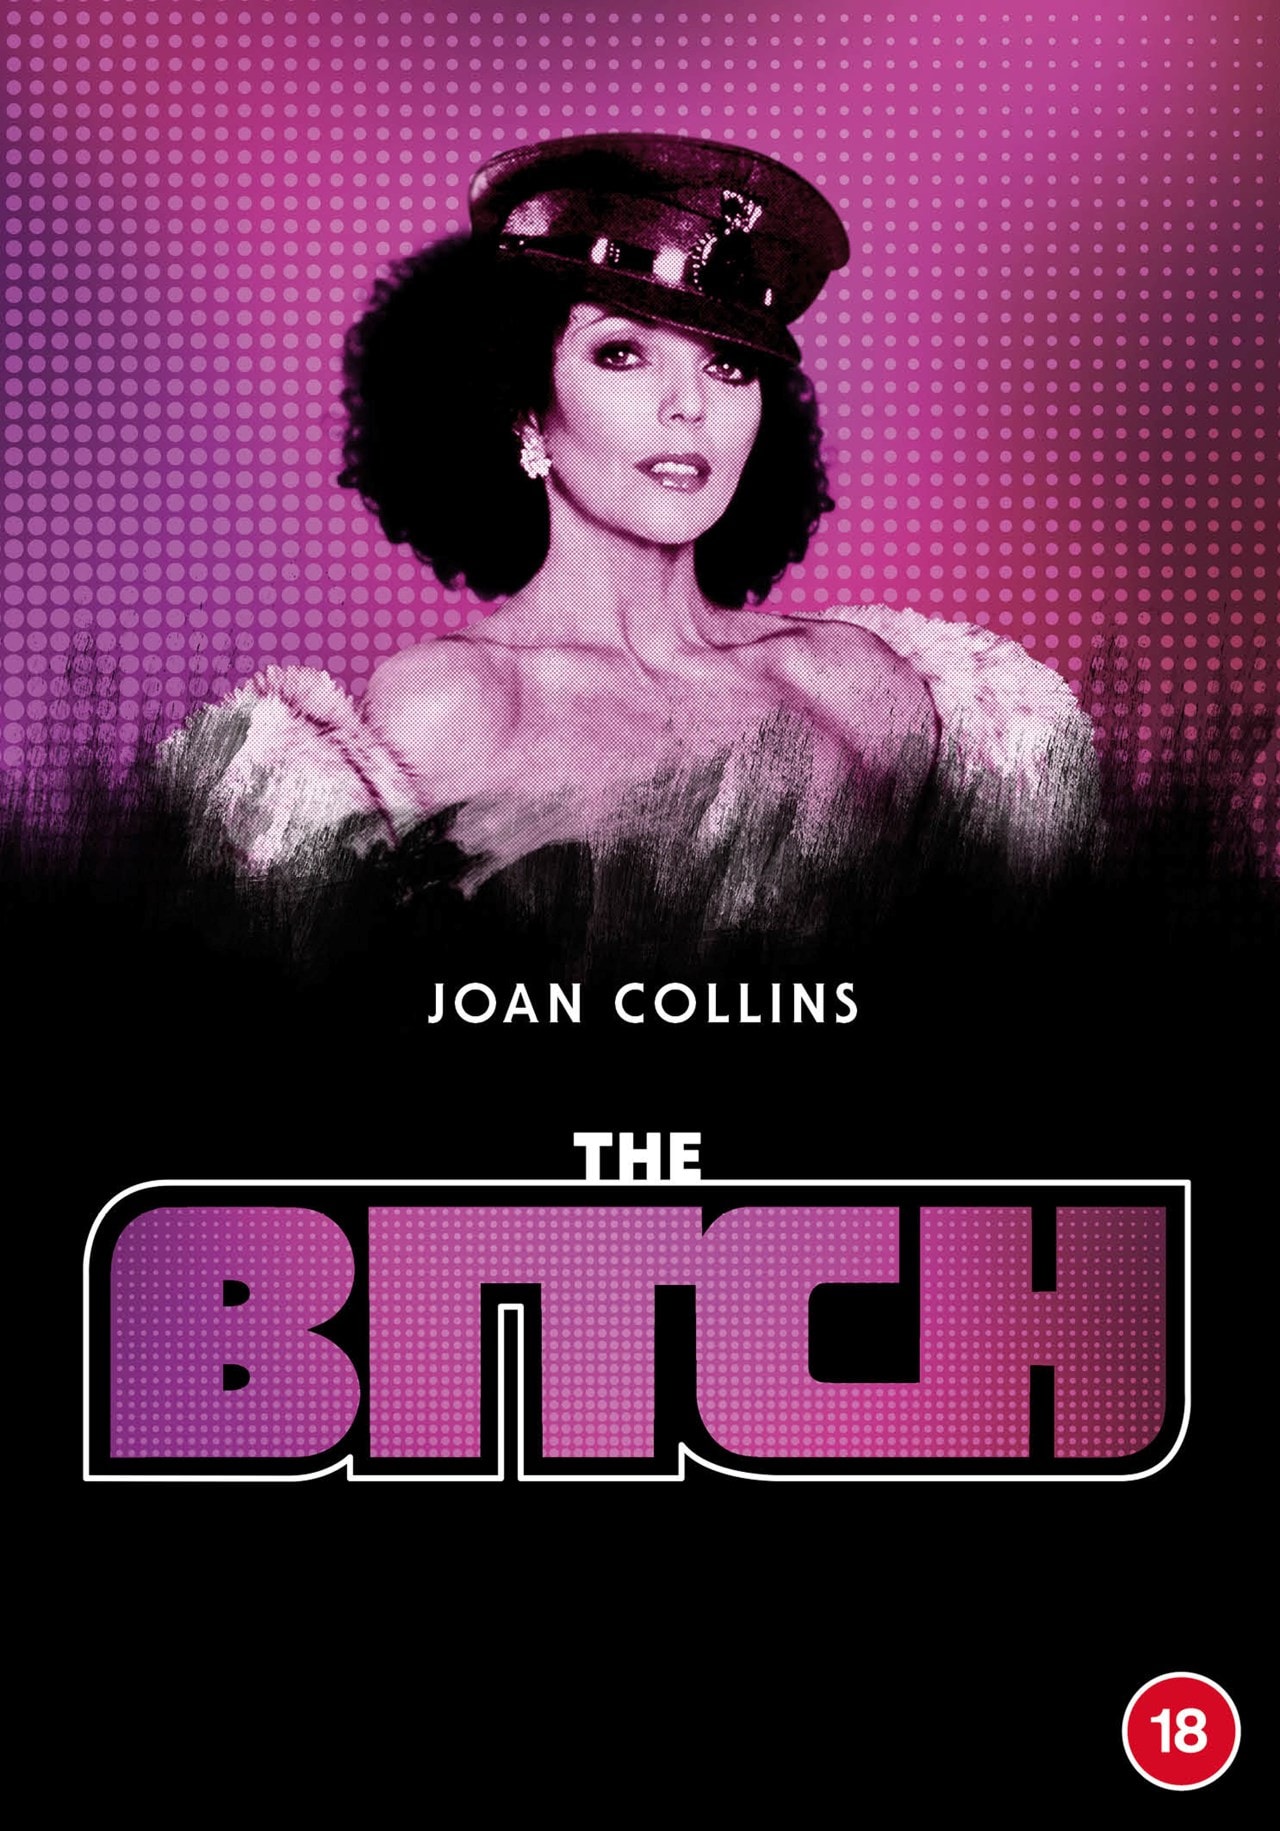 The Bitch Dvd Free Shipping Over £20 Hmv Store